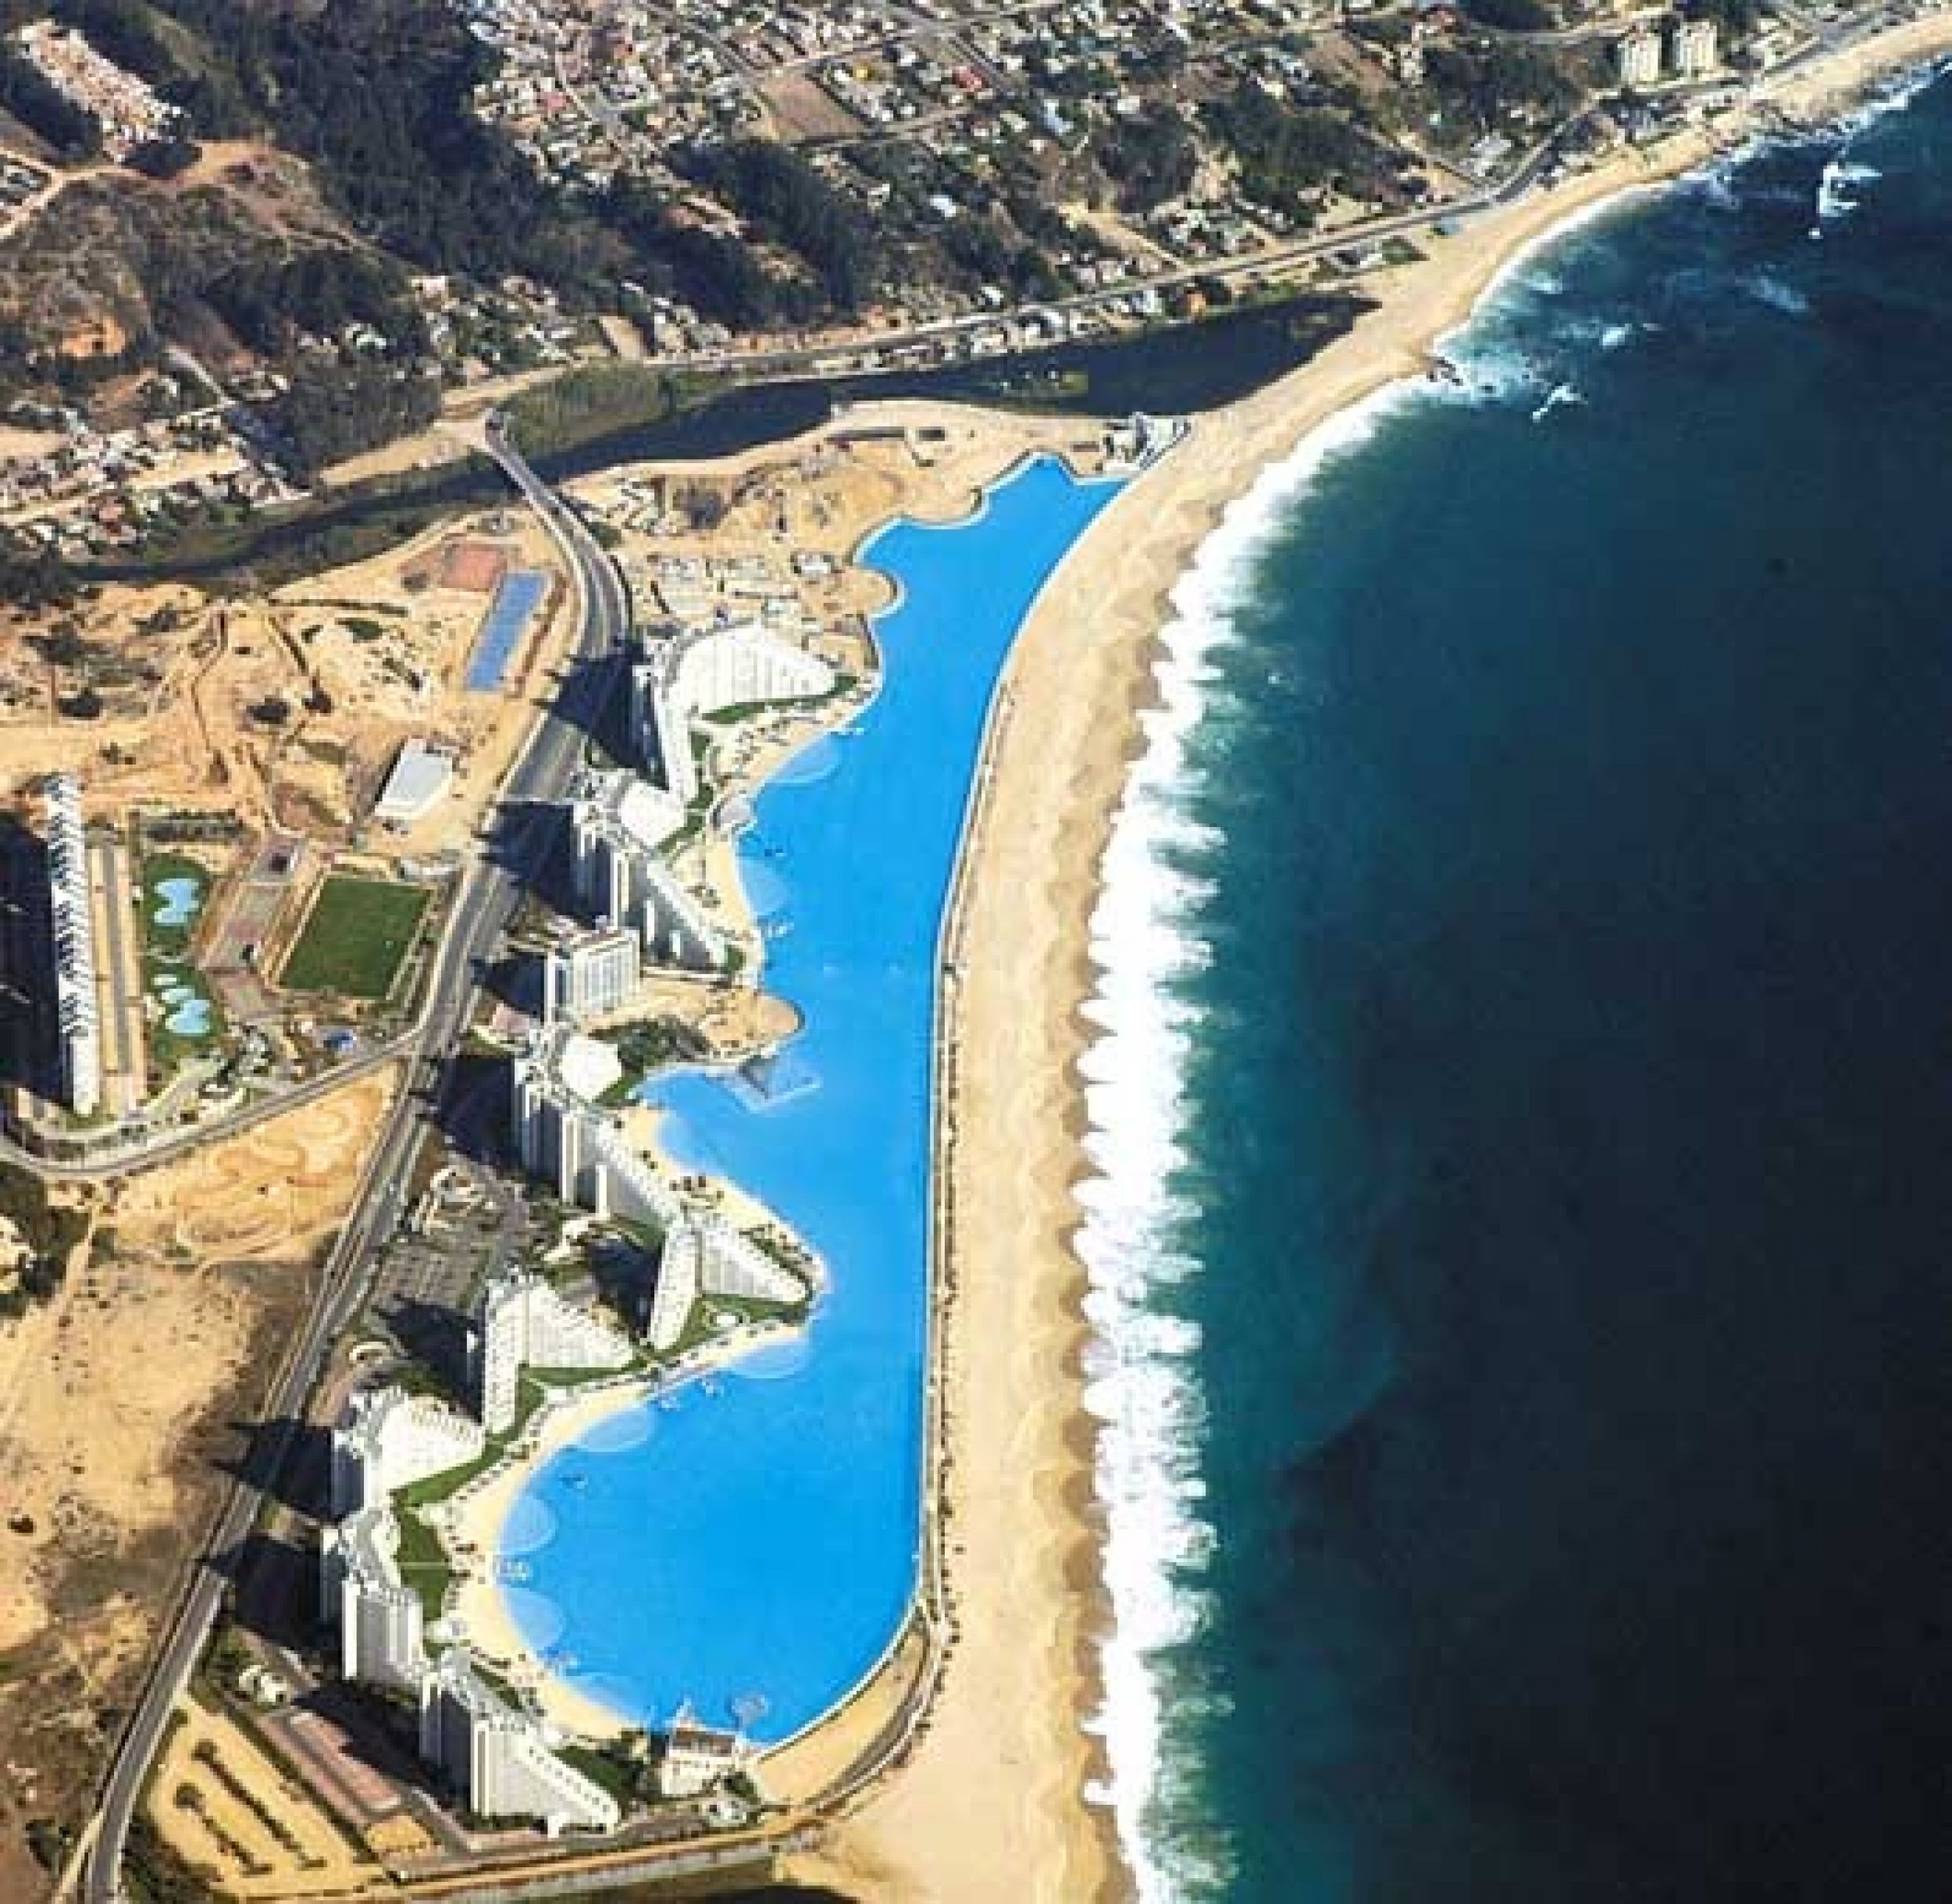 Worlds largest pool at San Alfonso del Mar resort in Chile. Photo Wikimedia Commons